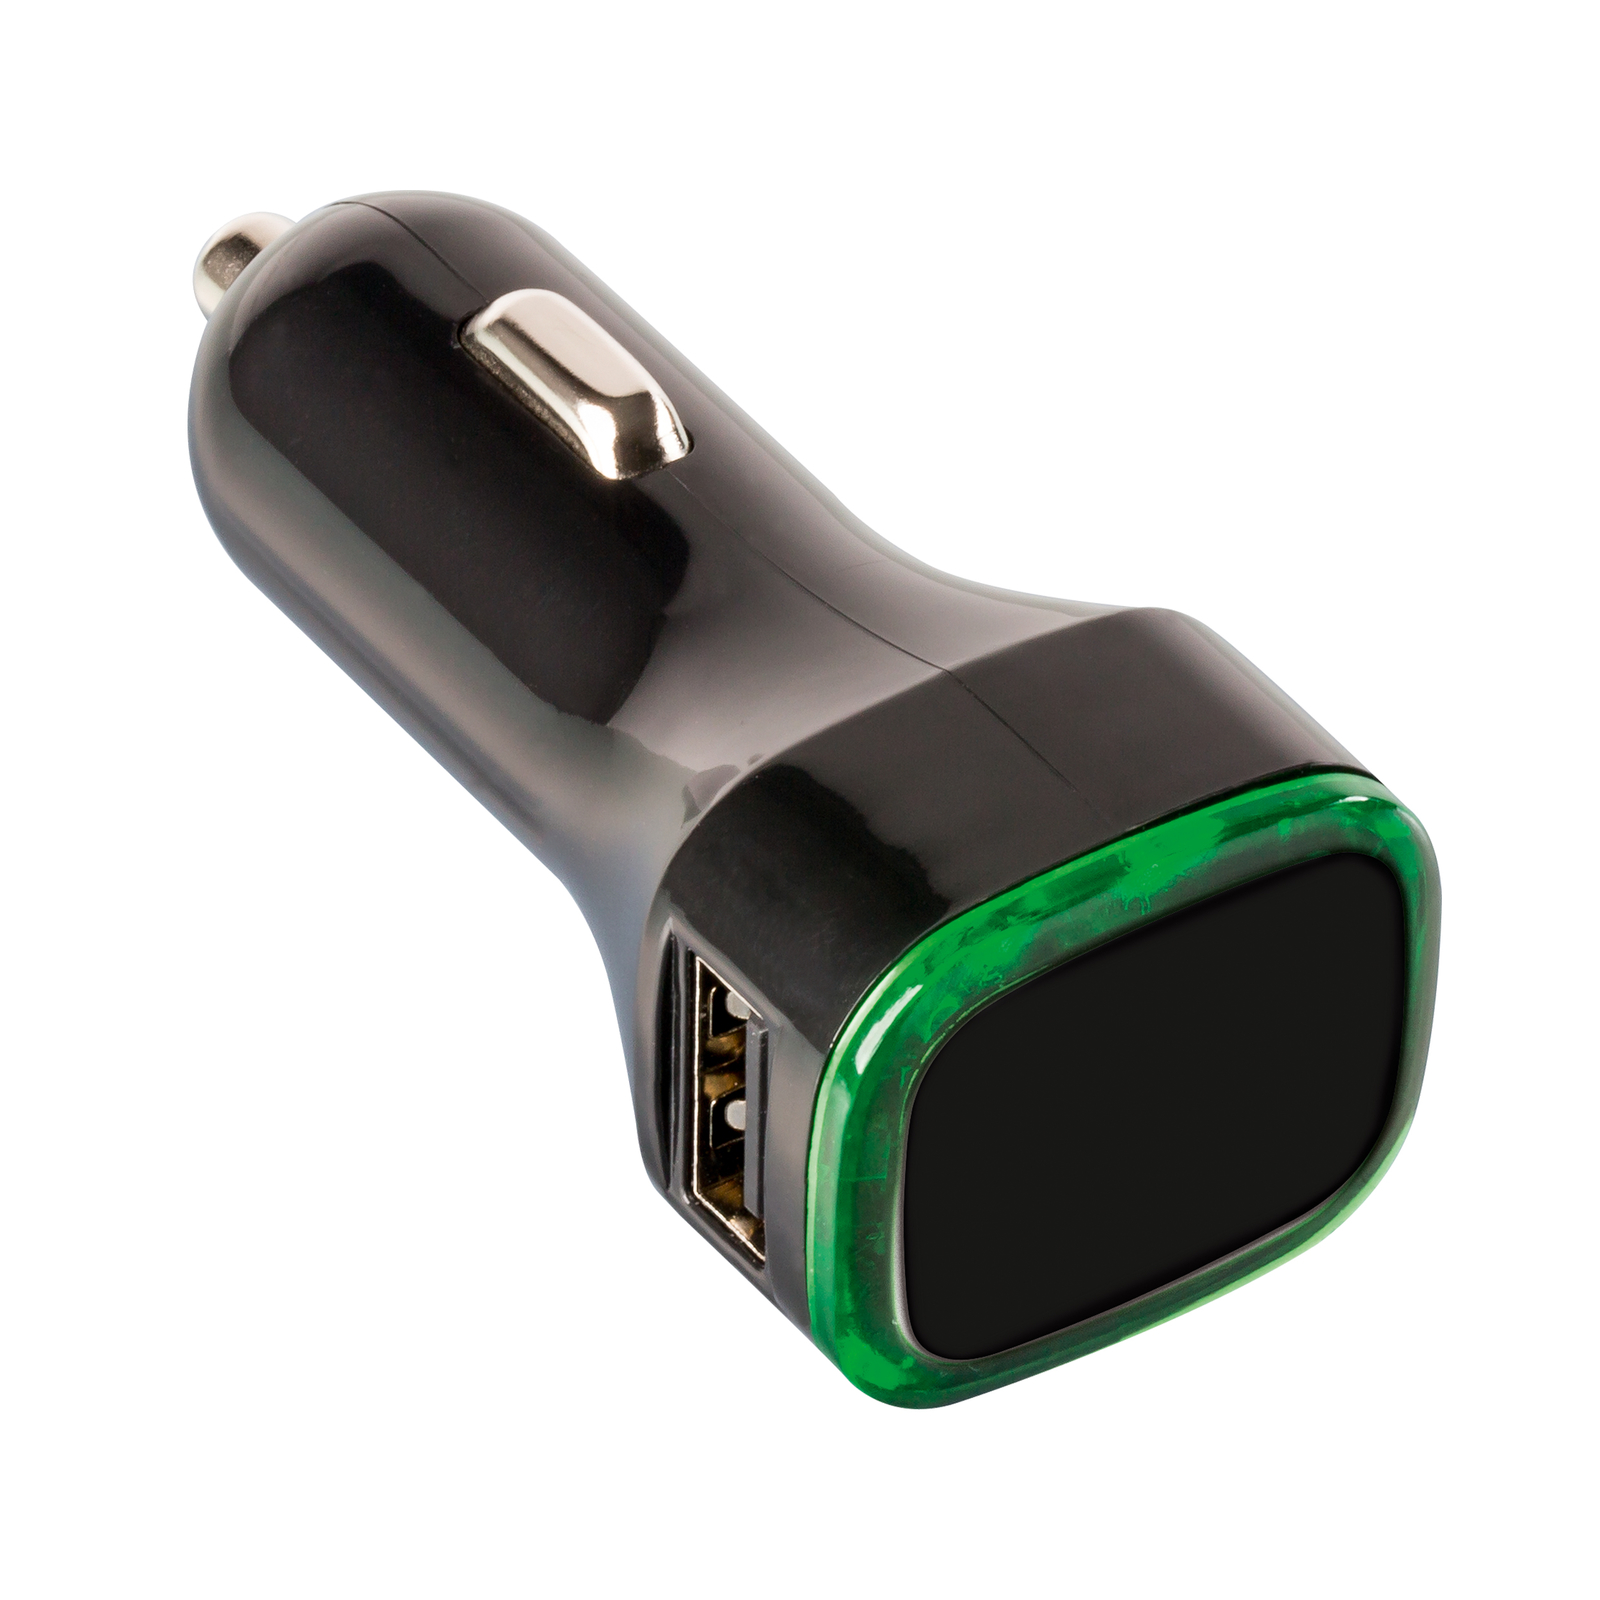 Promo USB car charger adapter RC 500